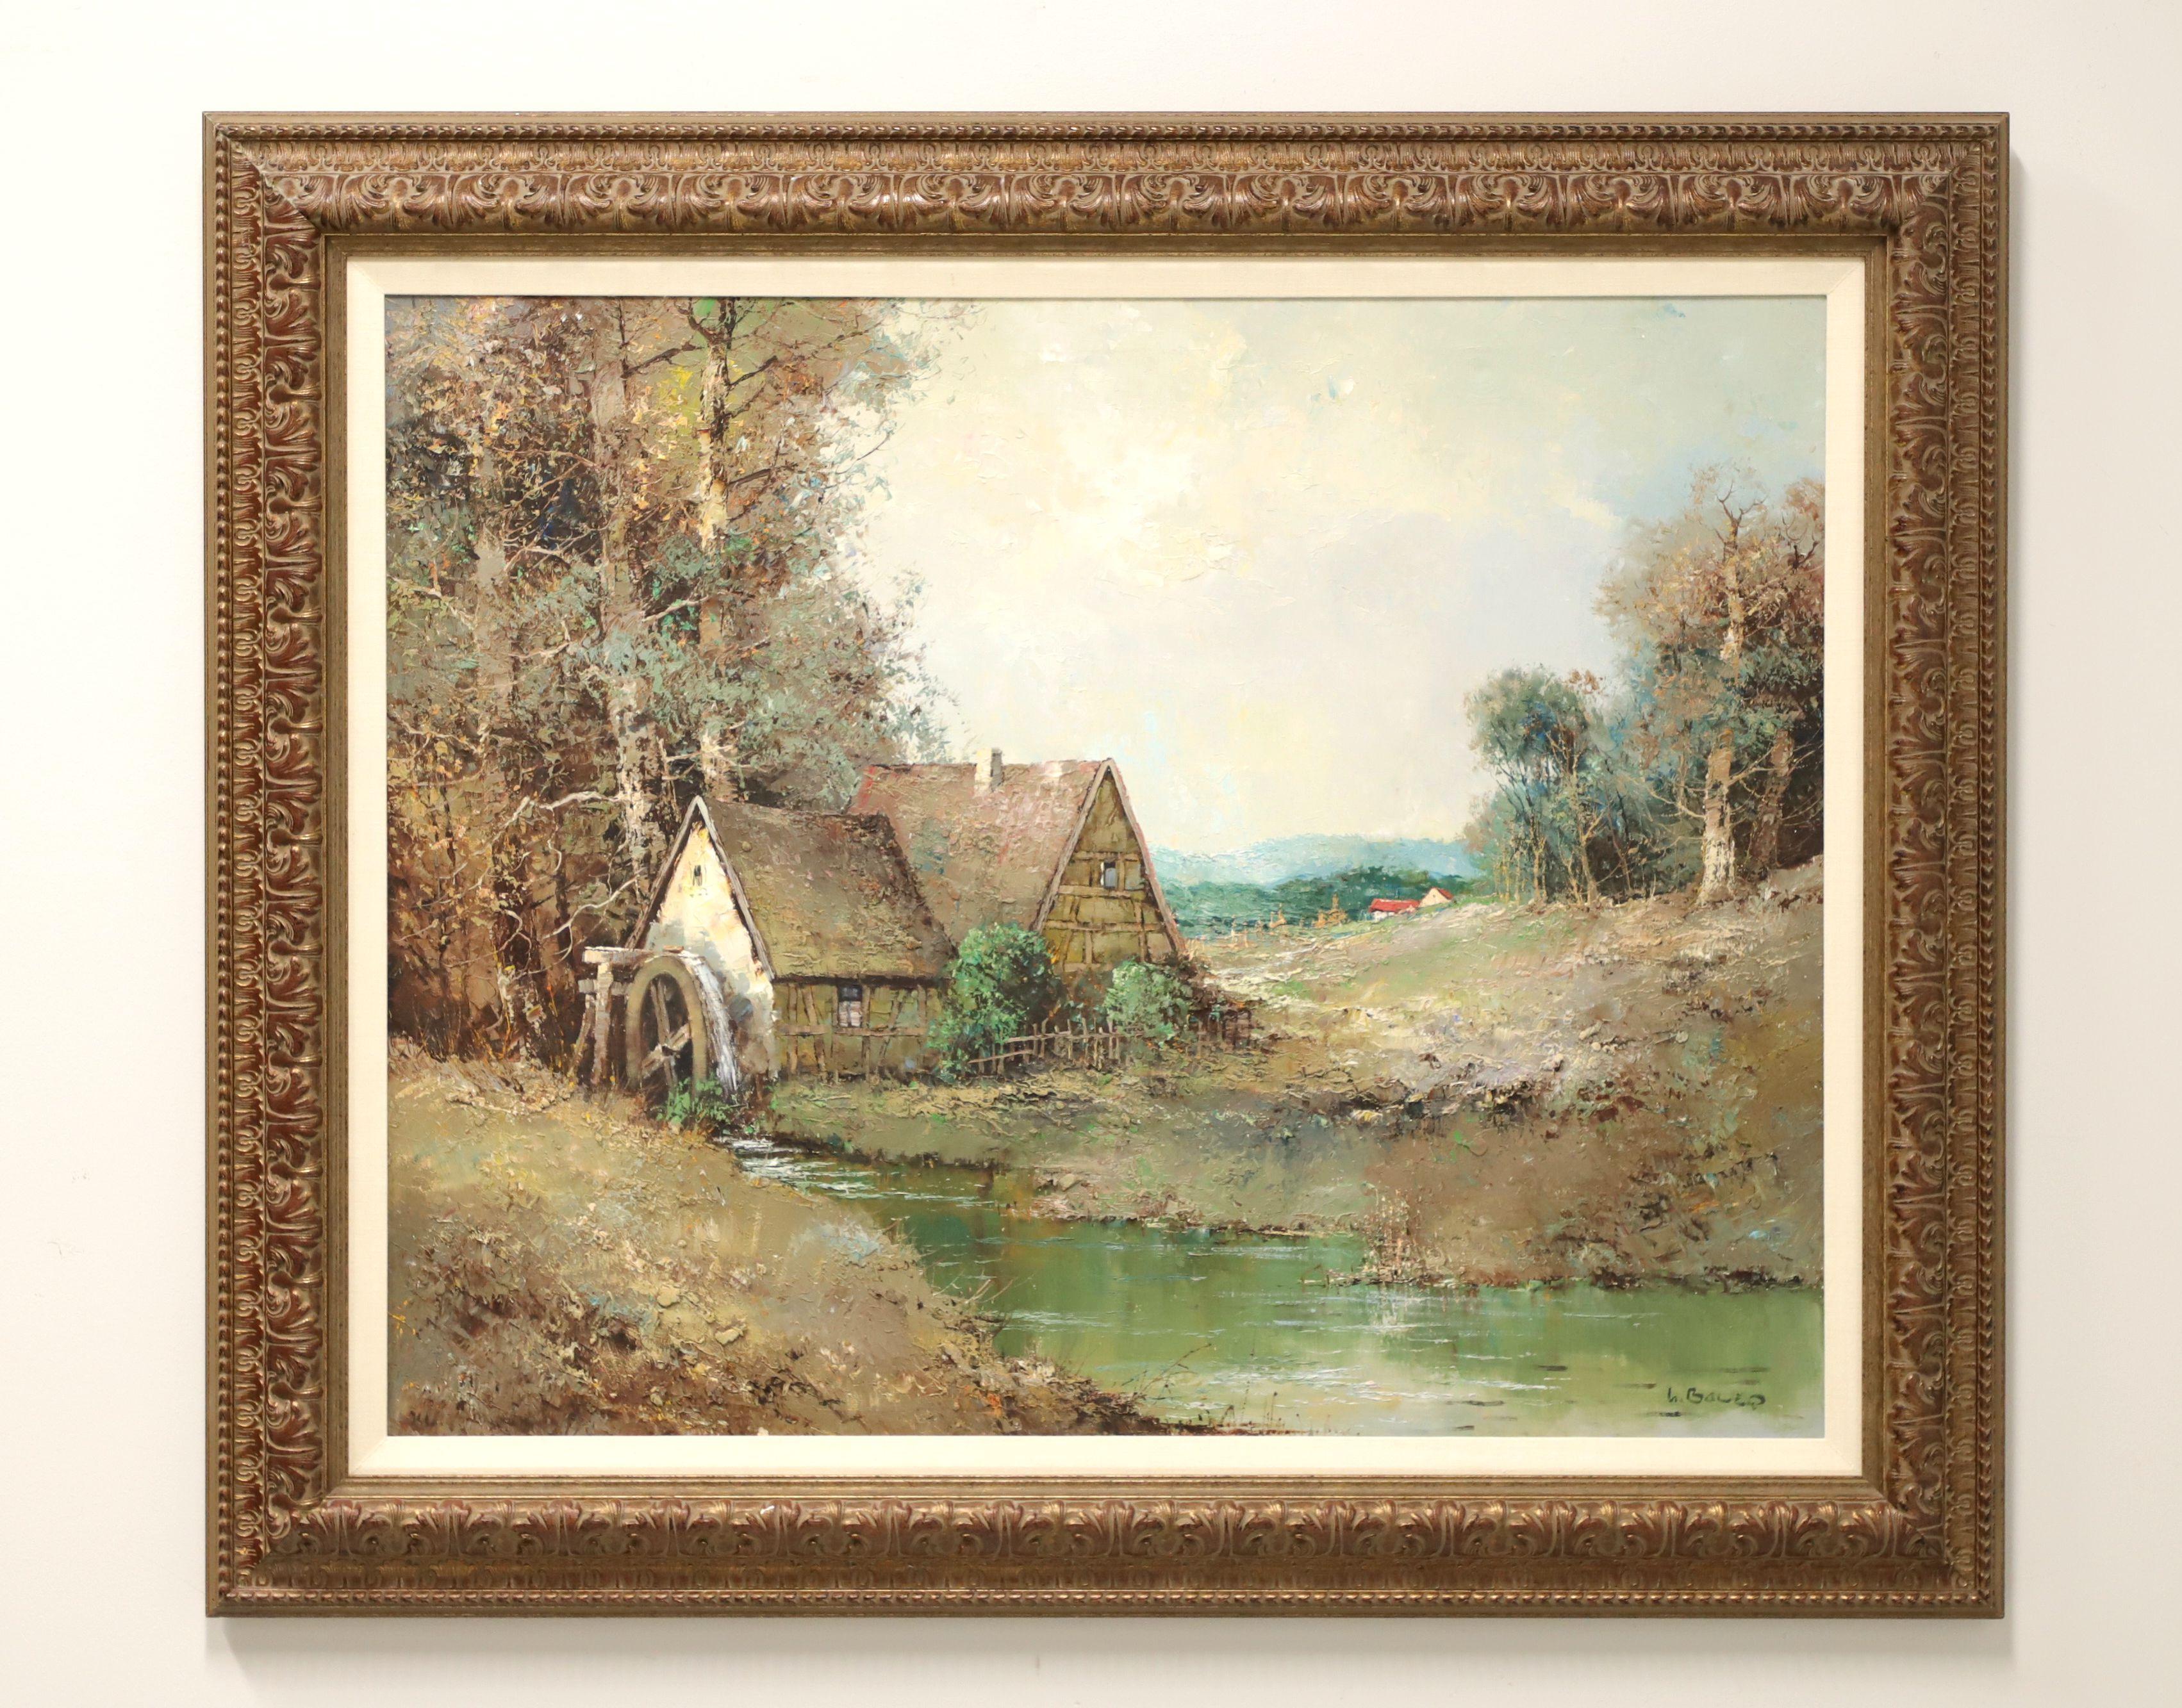 20th Century Original Acrylic on Canvas Painting - Watermill Scene - Signed L. Bauer For Sale